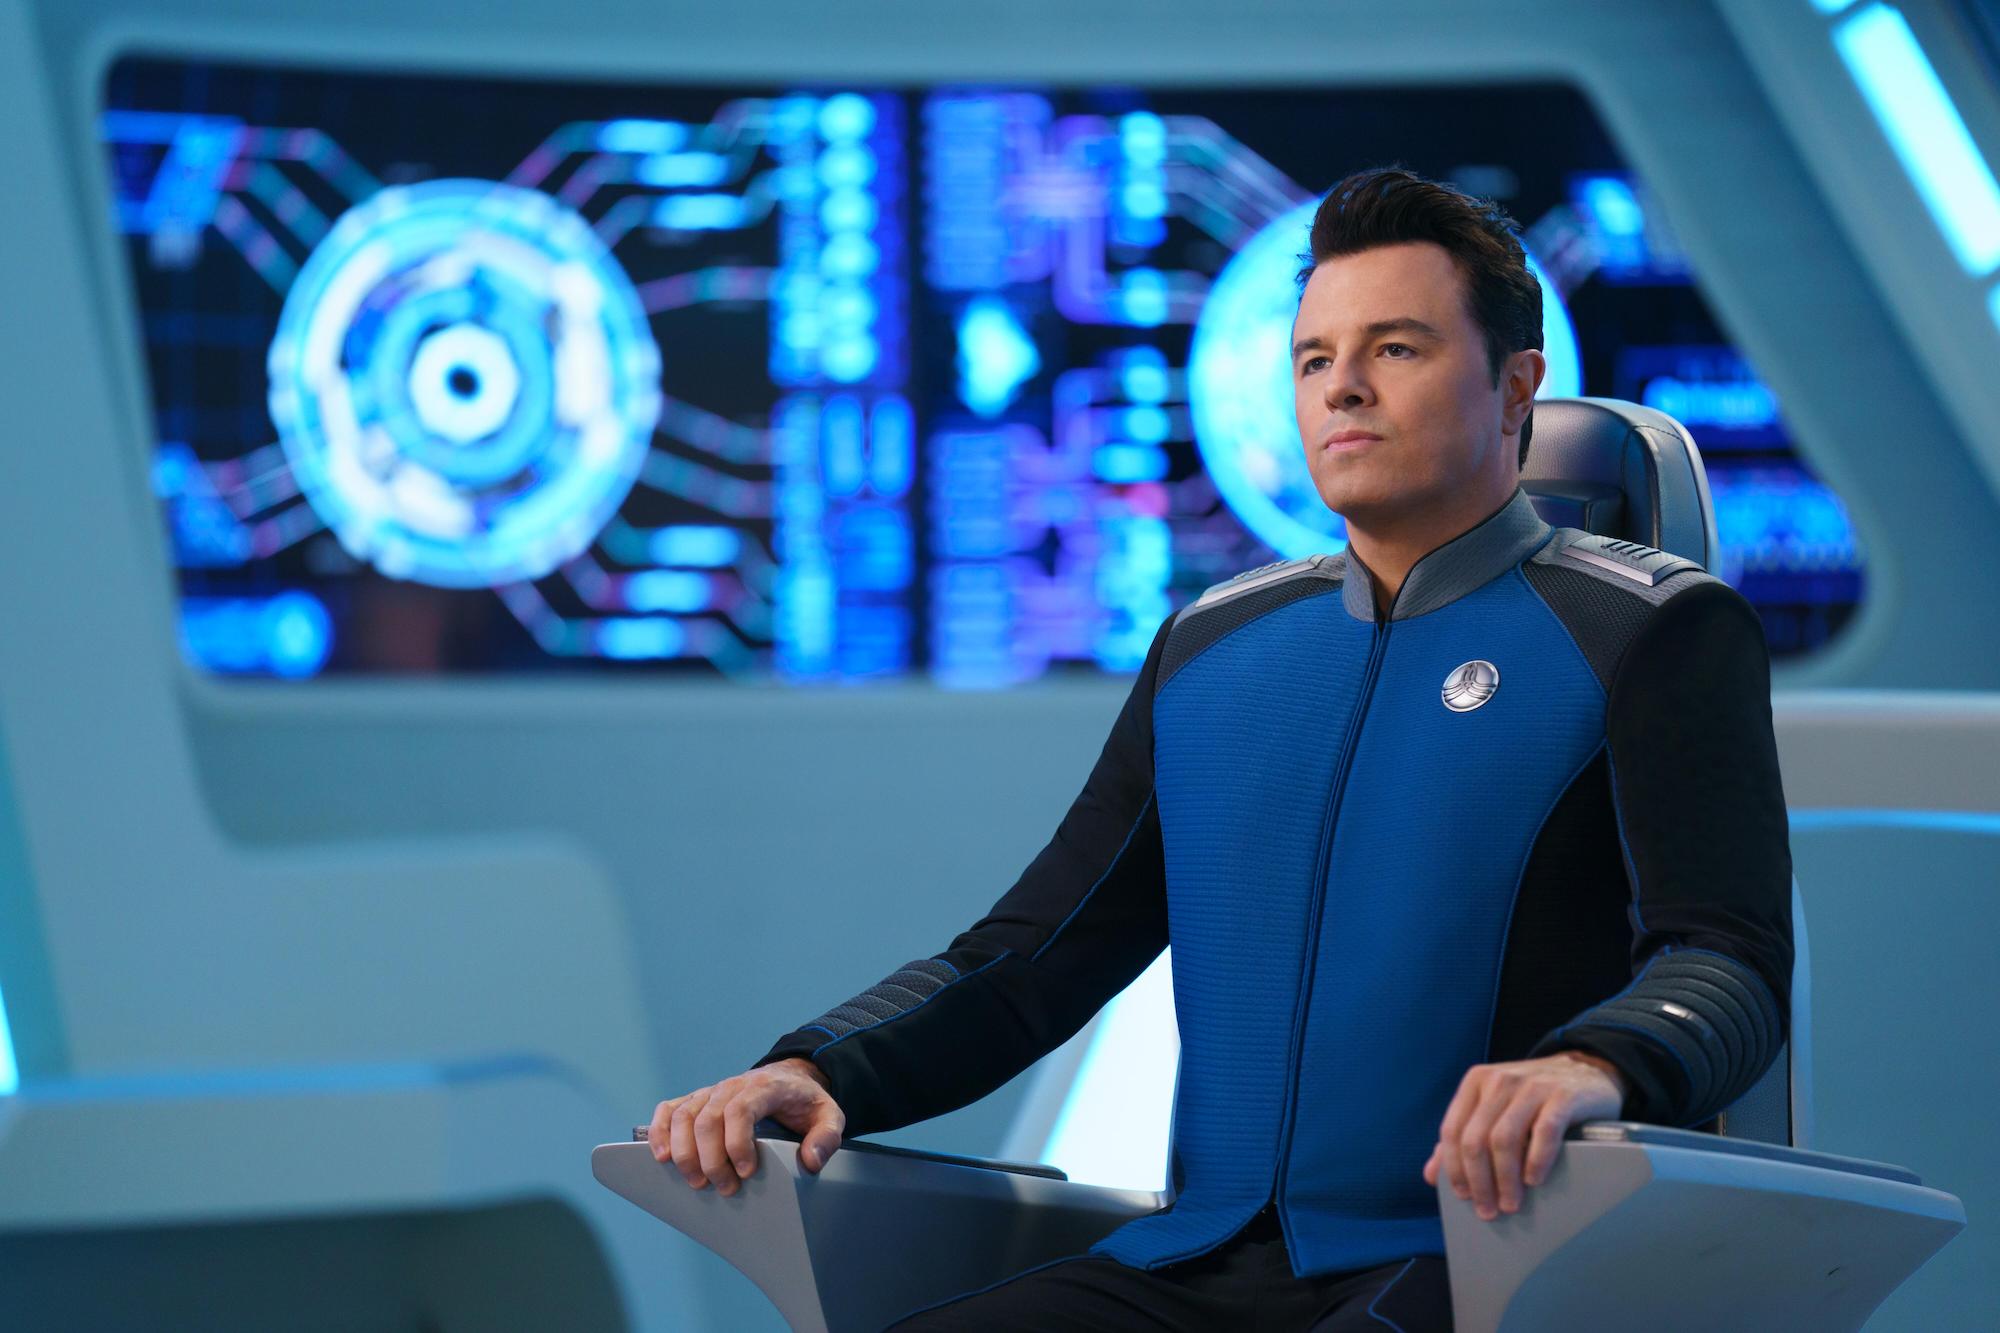 'The Orville': Seth MacFarlane sits in the captain's chair wearing specifically designed activewear